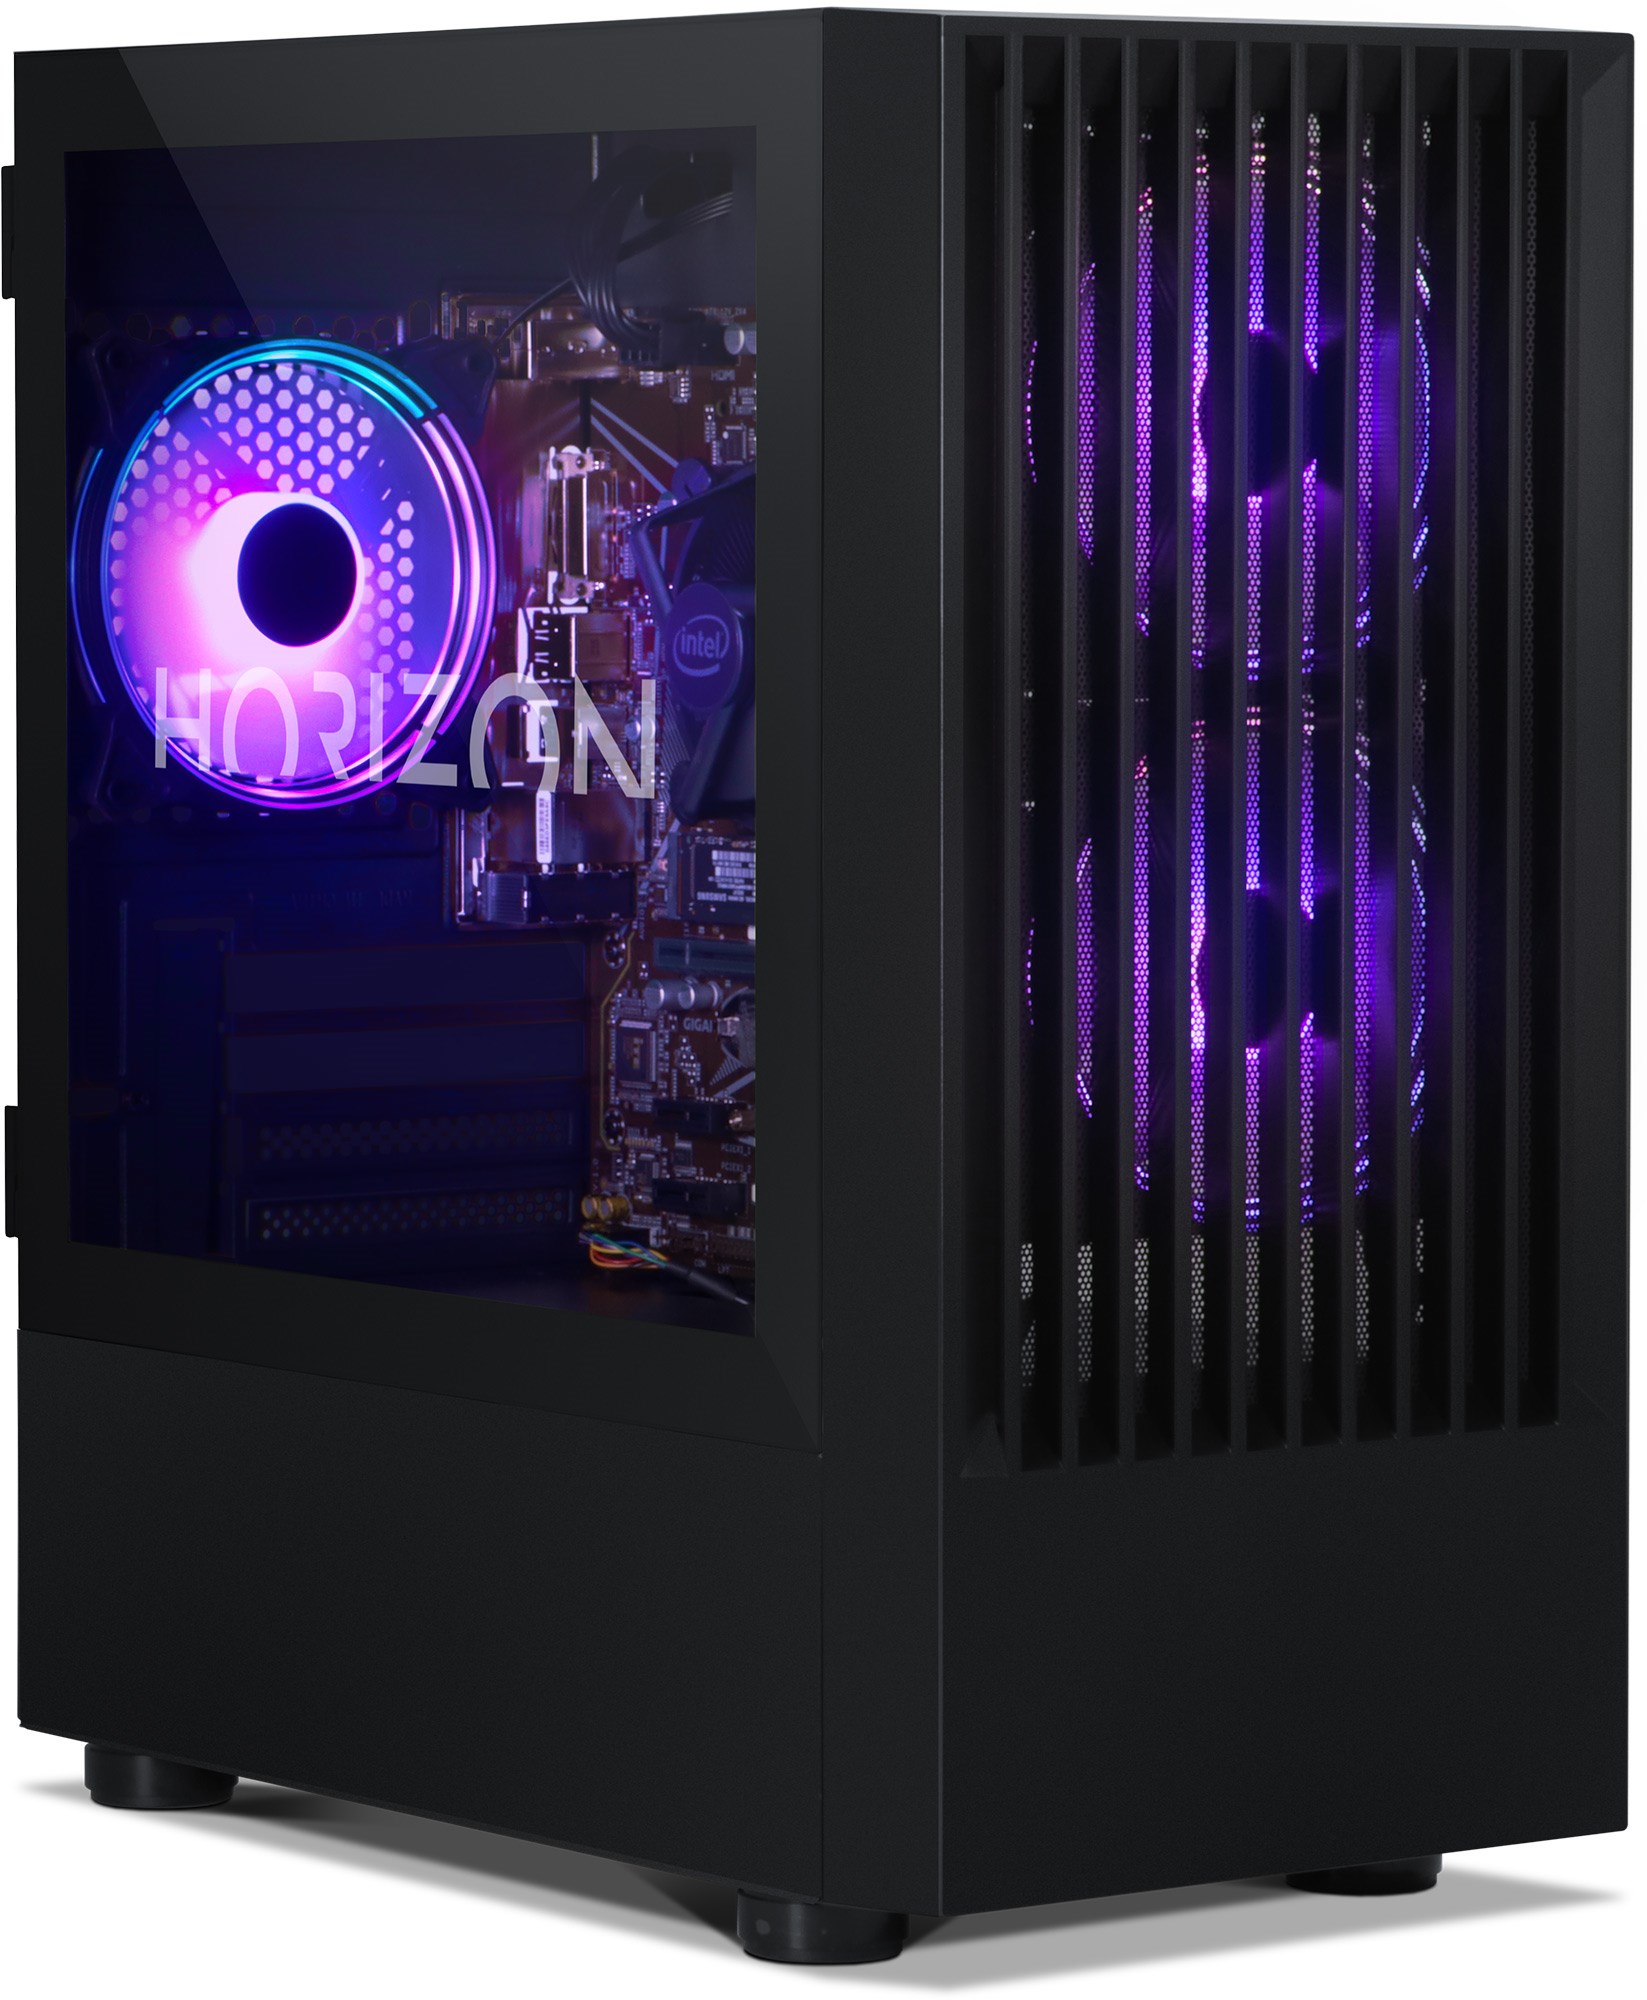 Front and left side view of the Horizon Intel Core i3-10100F GeForce GTX 1650 Gaming PC